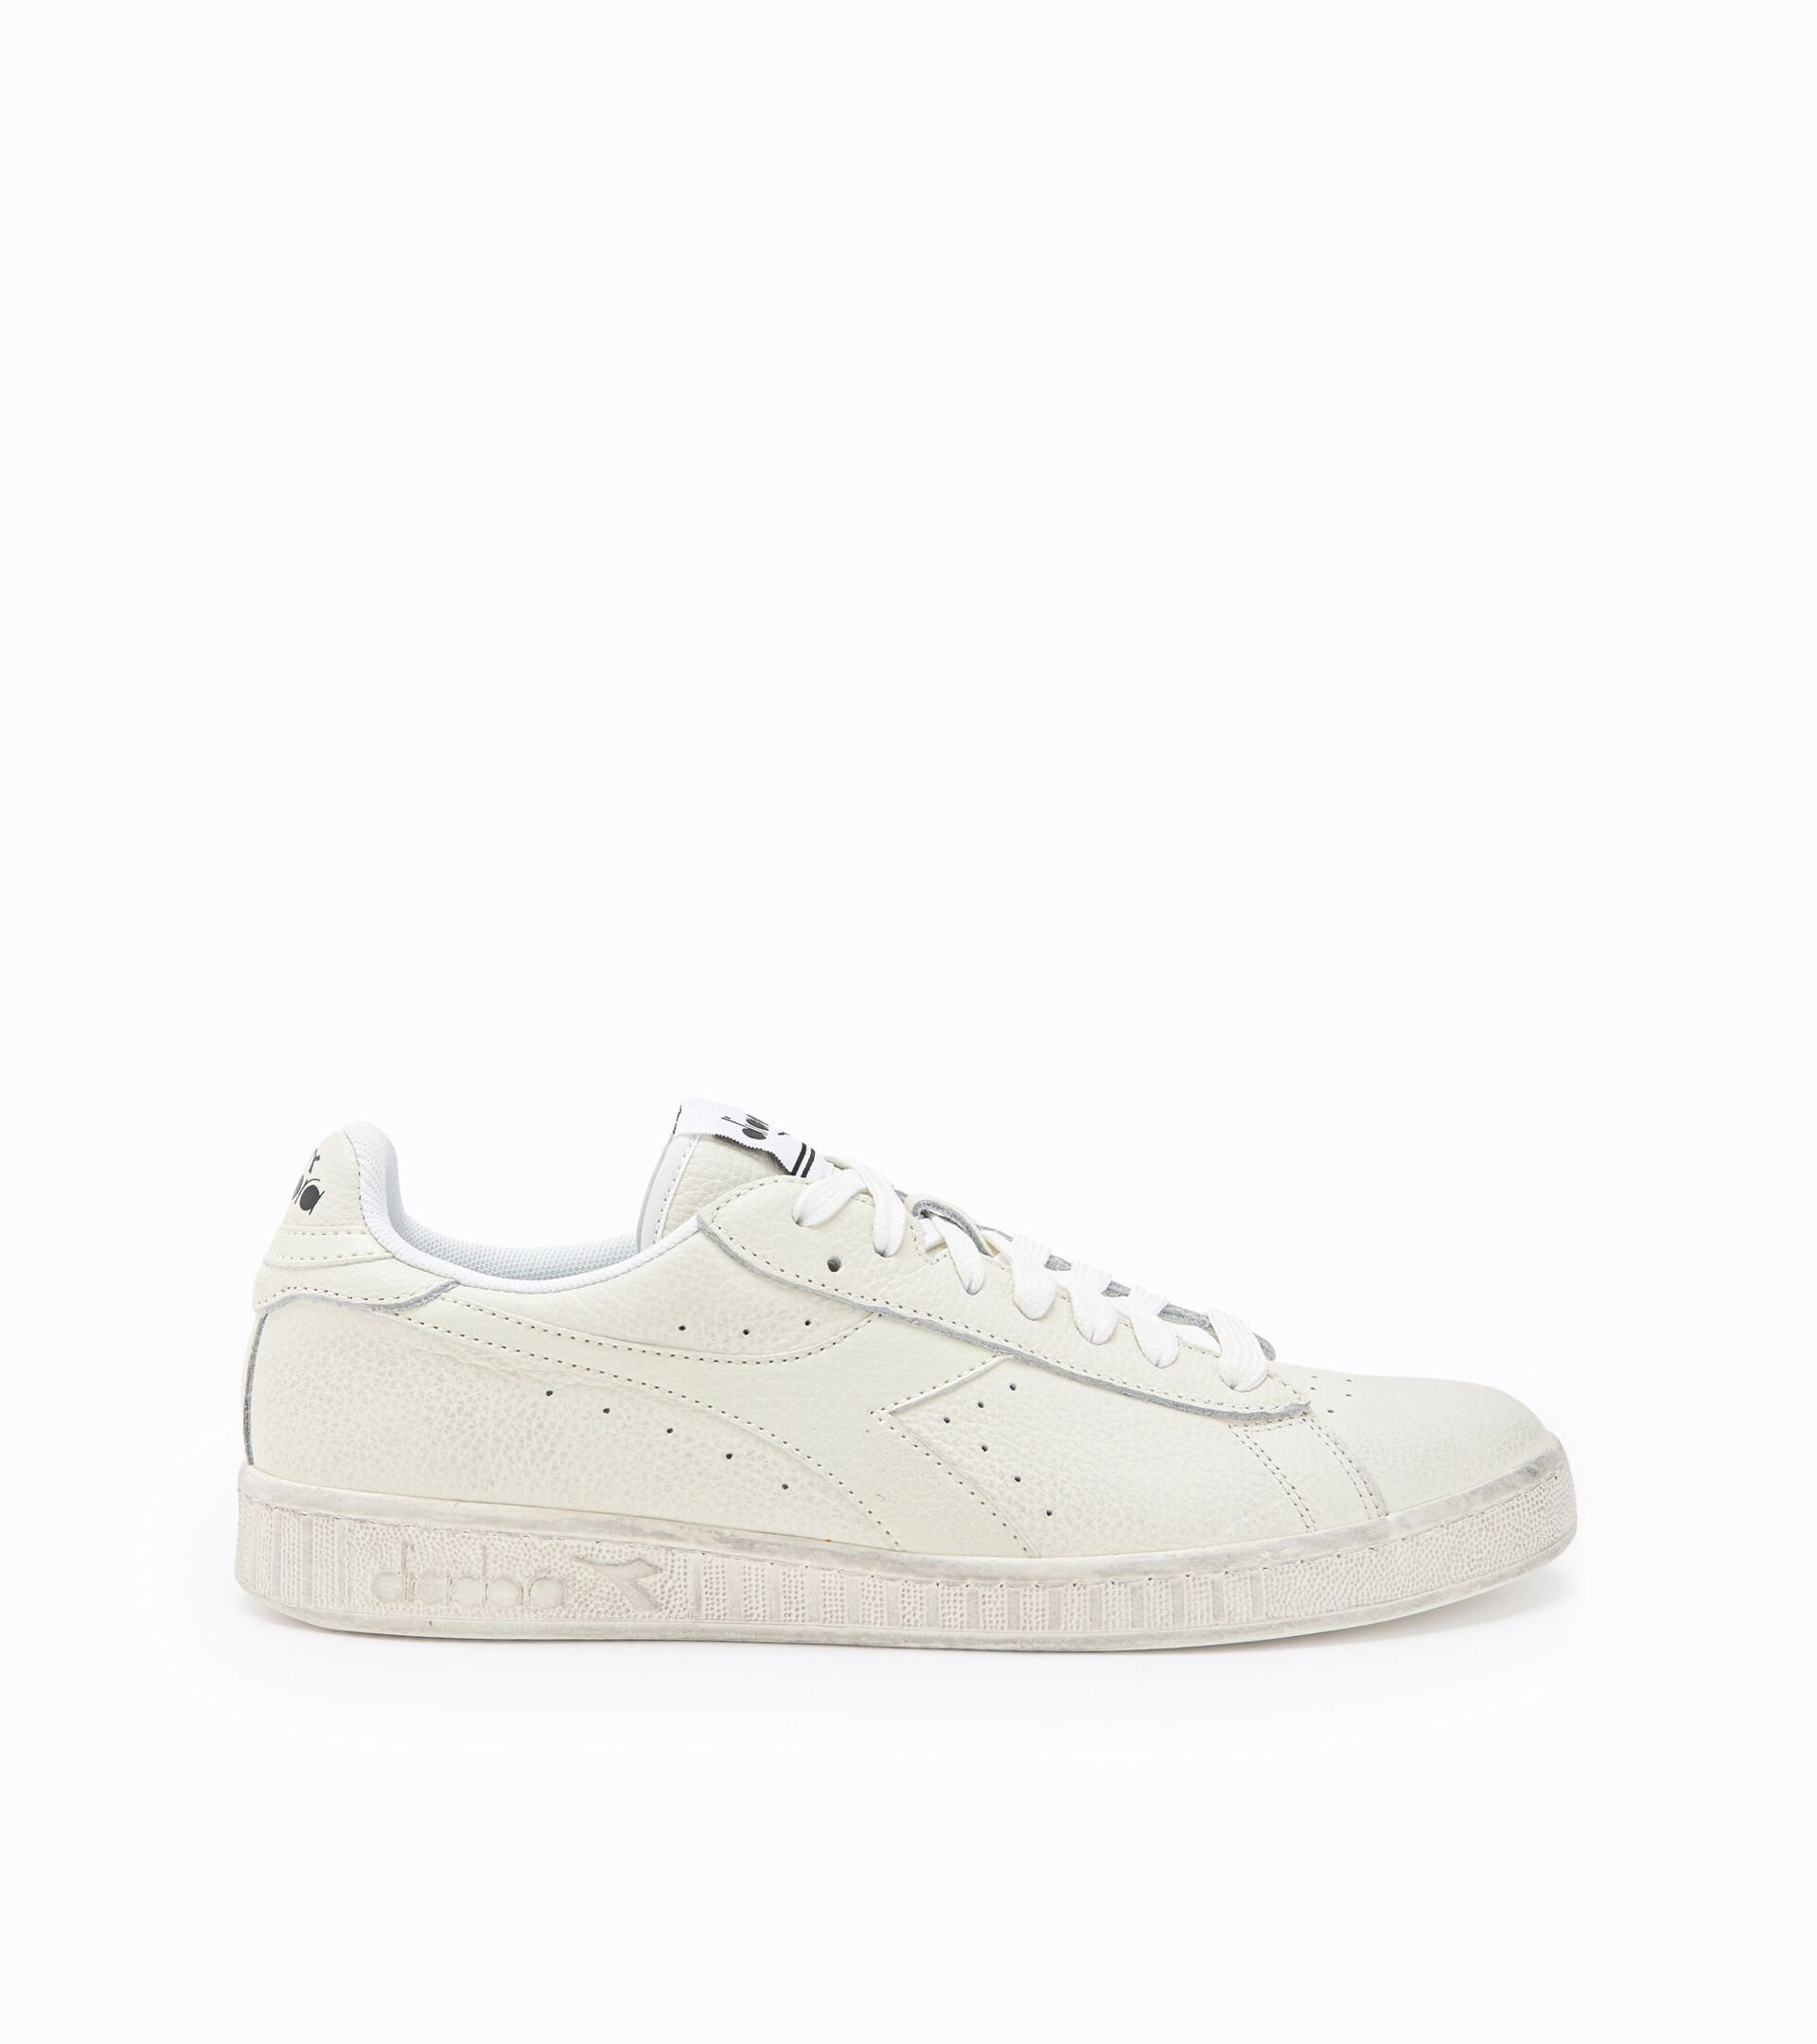 GAME L LOW WAXED Sporty sneakers - Gender neutral - Diadora Online Store US